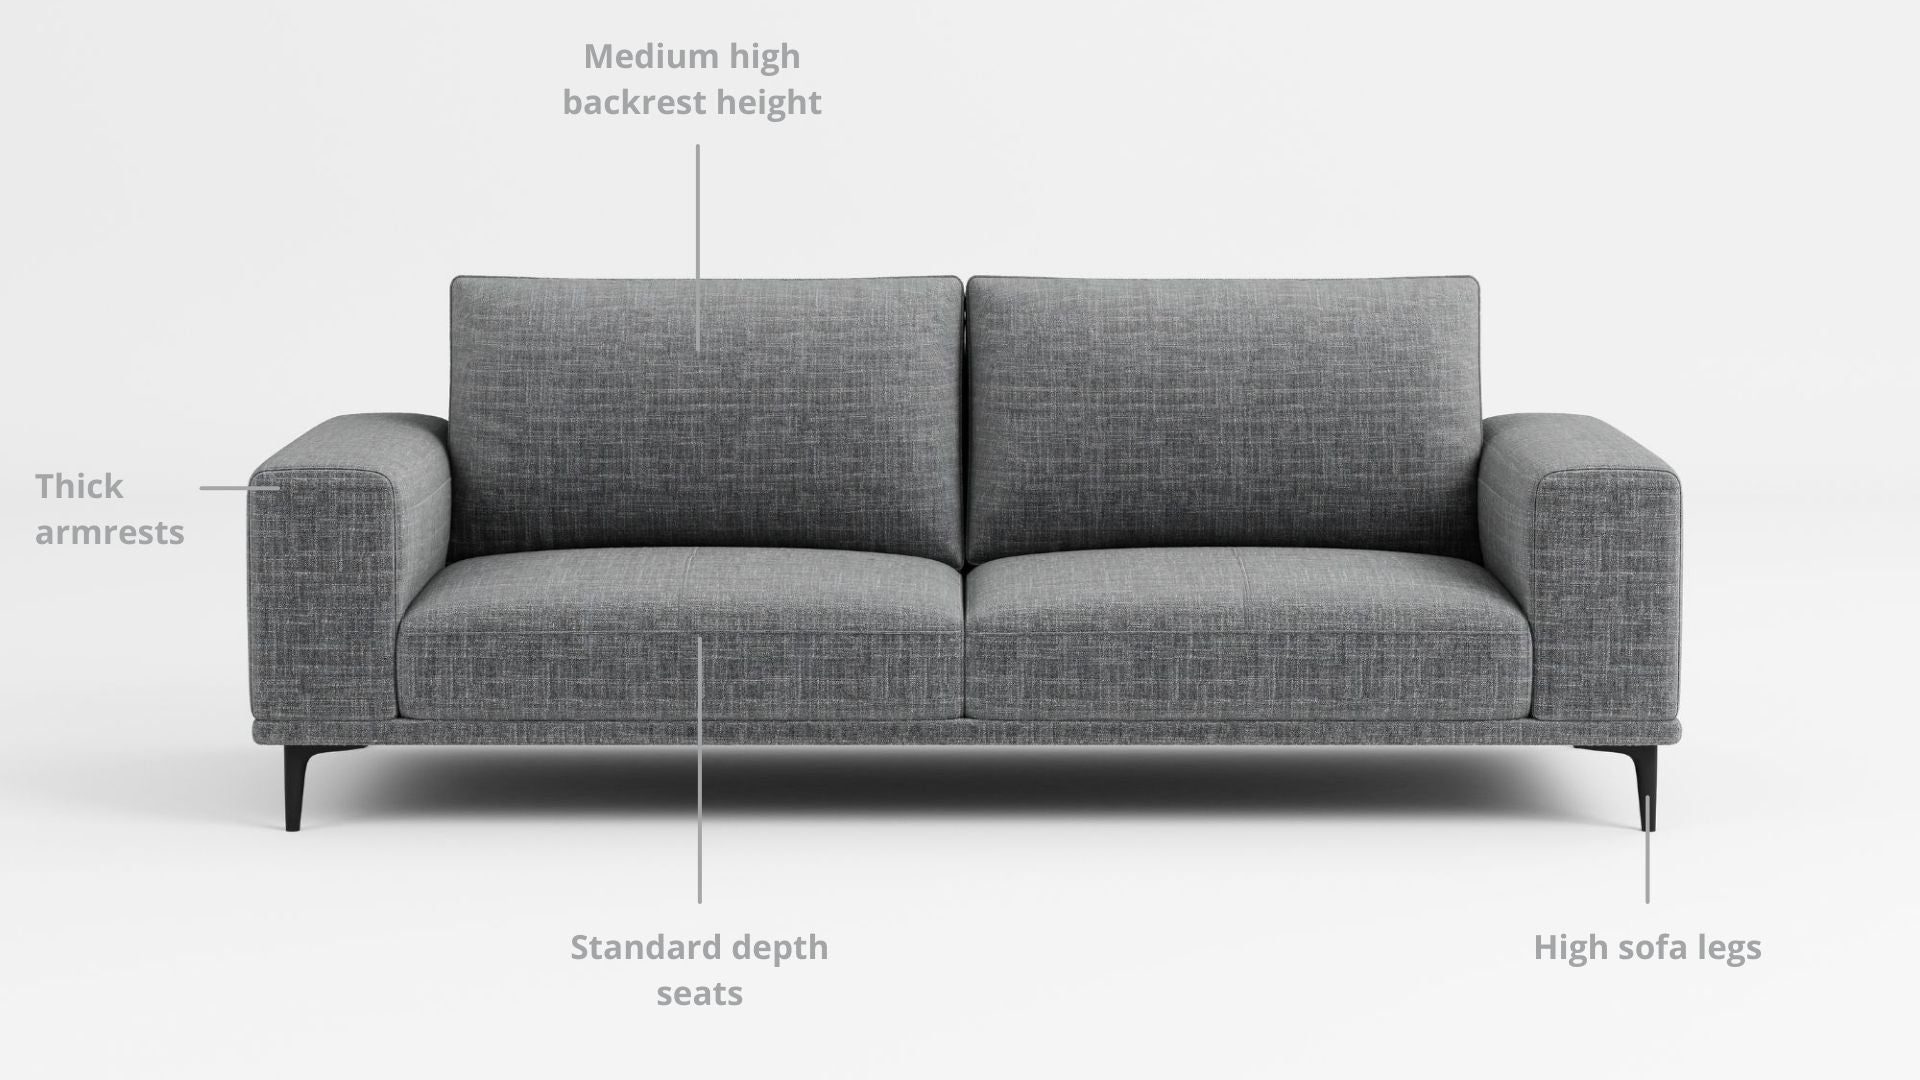 Key features such as armrest thickness, cushion height, seat depth and sofa leg height for Calm Fabric Sofa